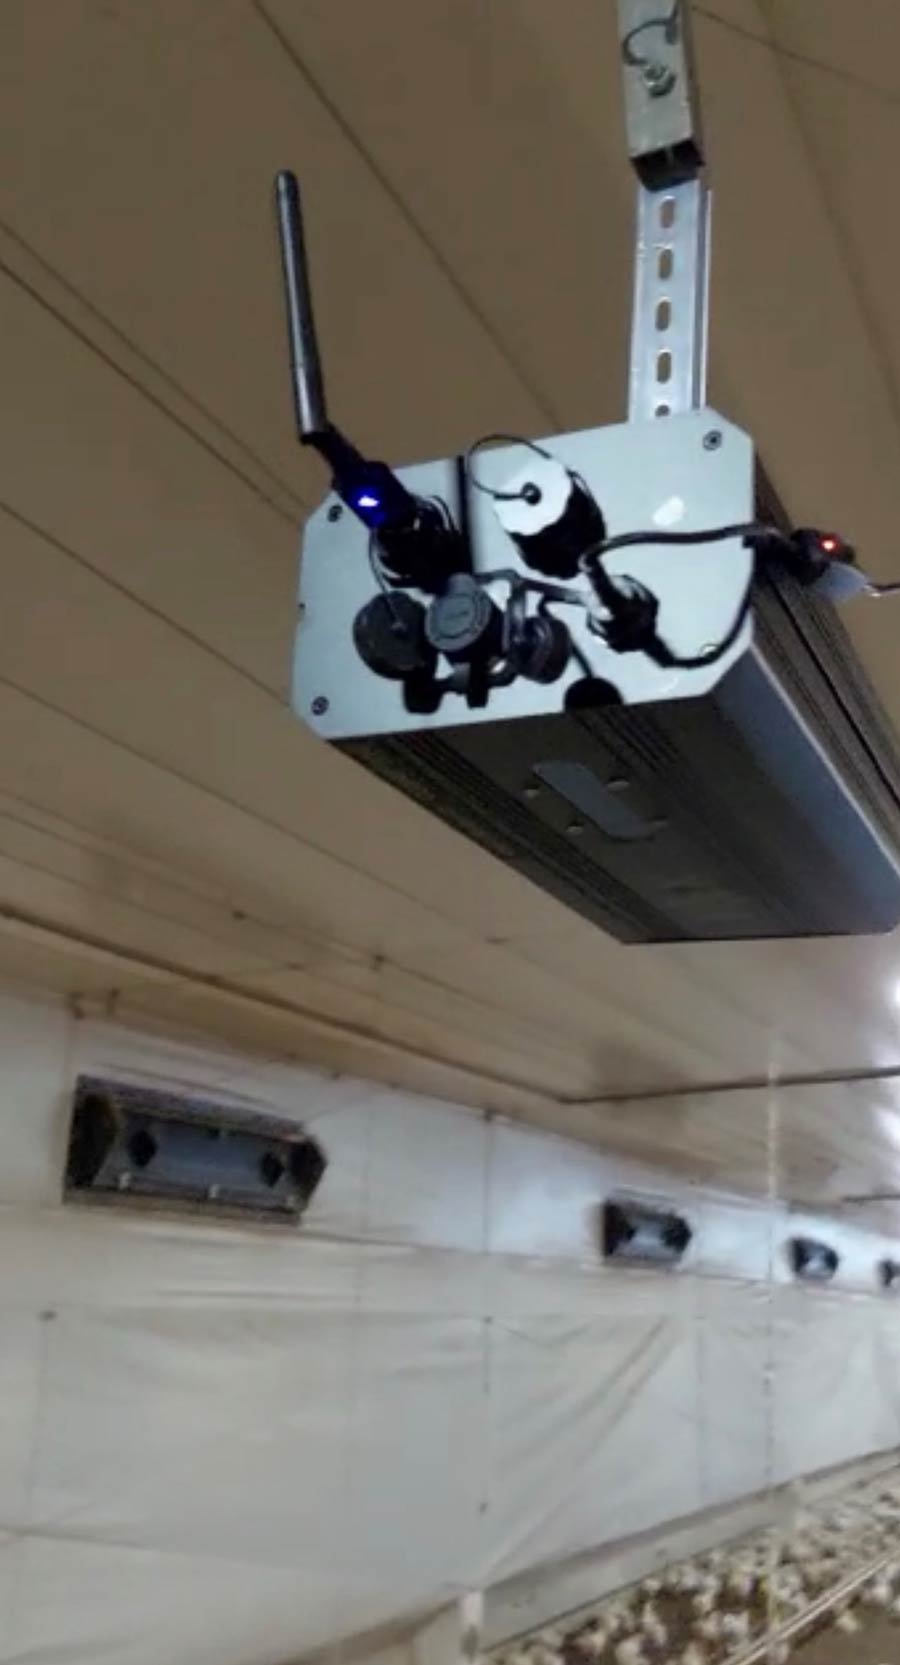 Birdoo device mounted on the ceiling of a poultry barn.